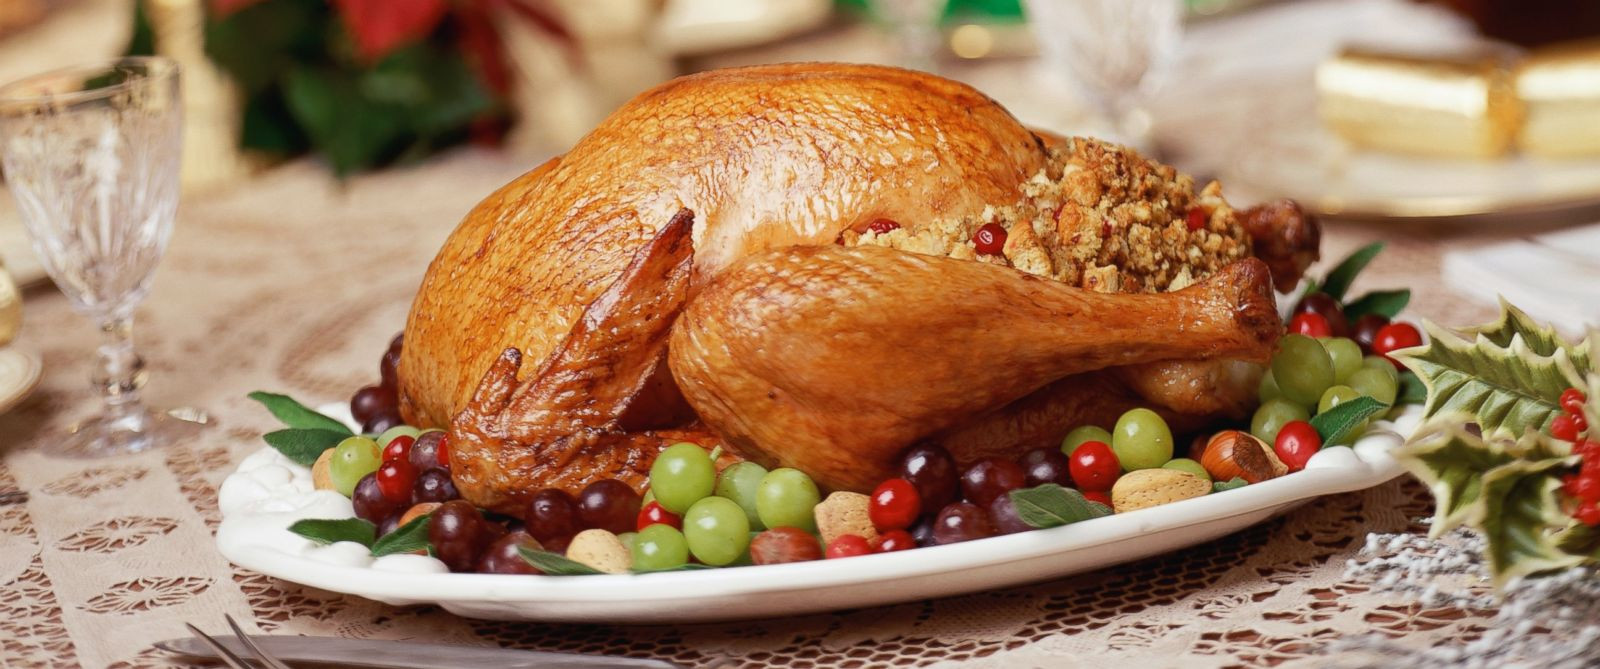 Thanksgiving Turkey Cost
 Turkey Prices Expected to Rise 15 to 20 Percent This